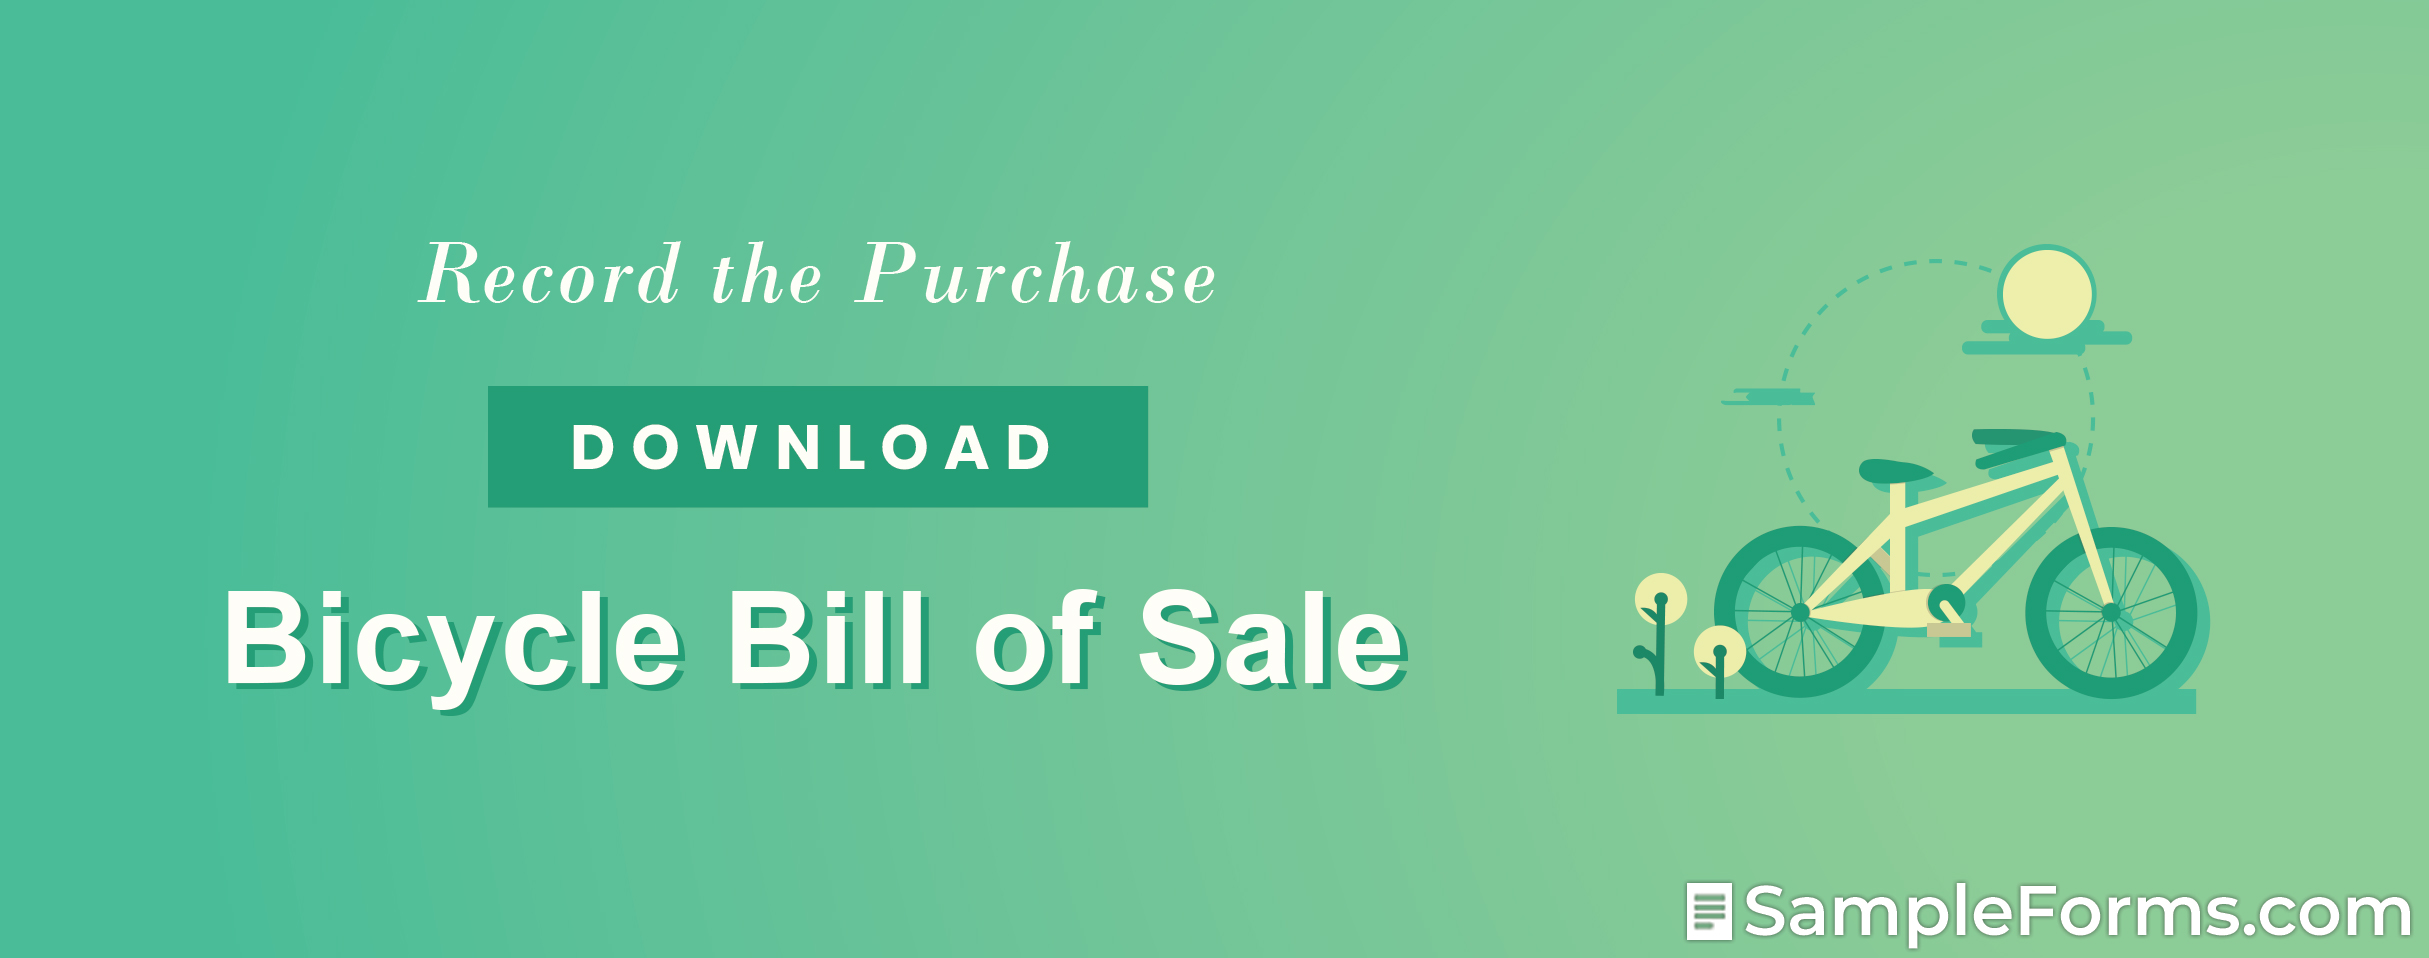 Bicycle Bill of Sale3